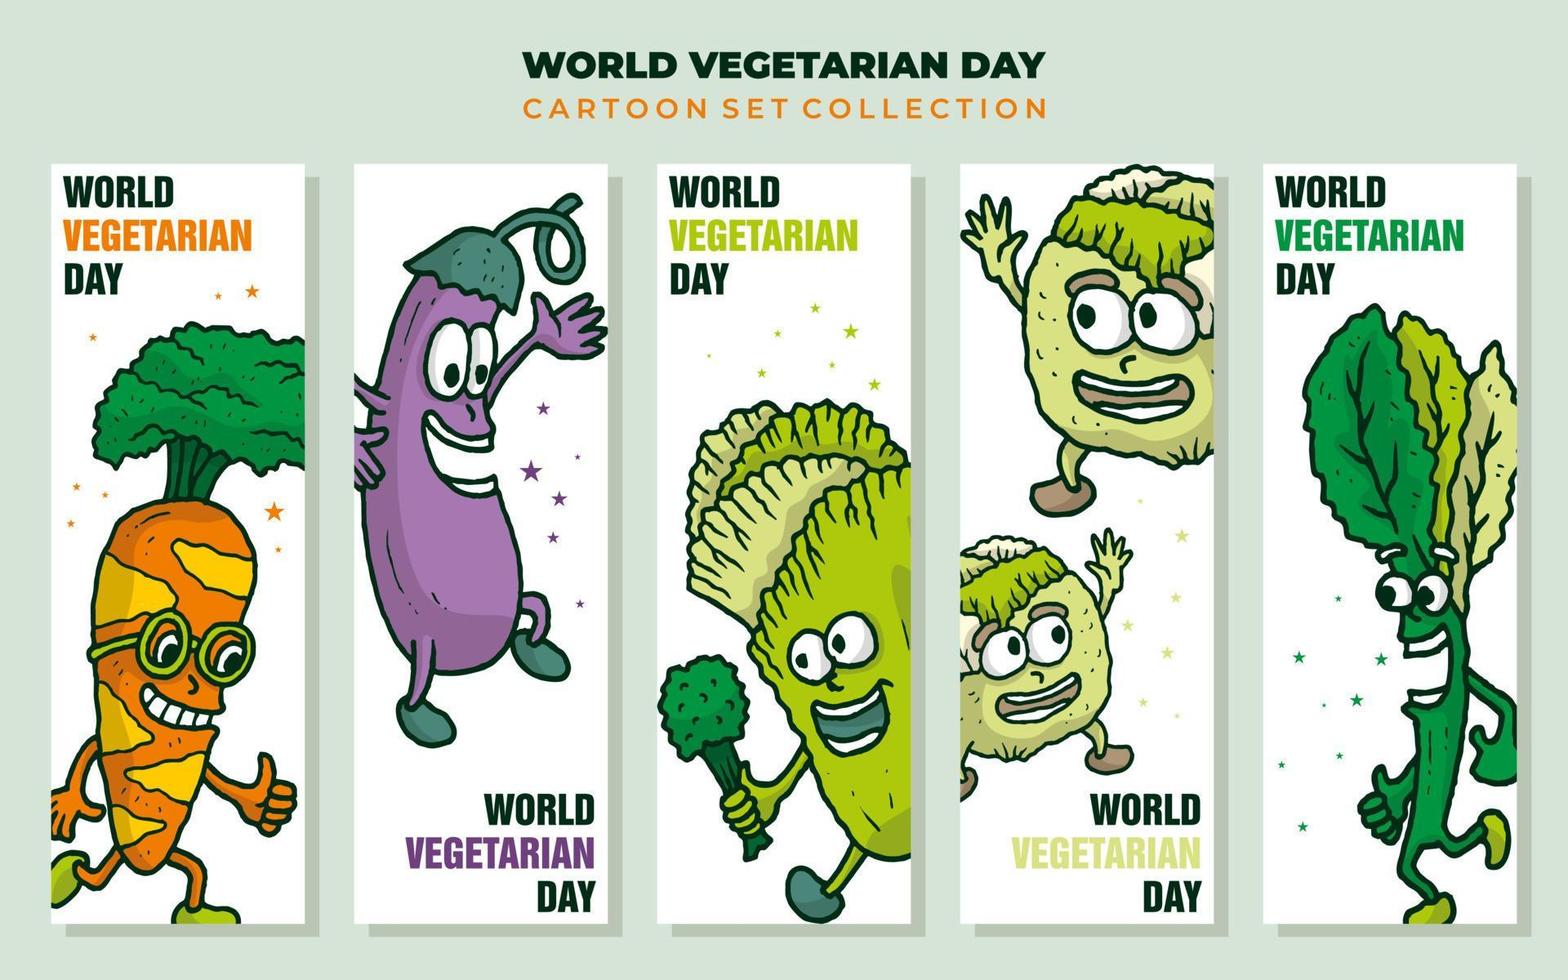 World vegetarian day banner collection with vegetables cartoon character vector